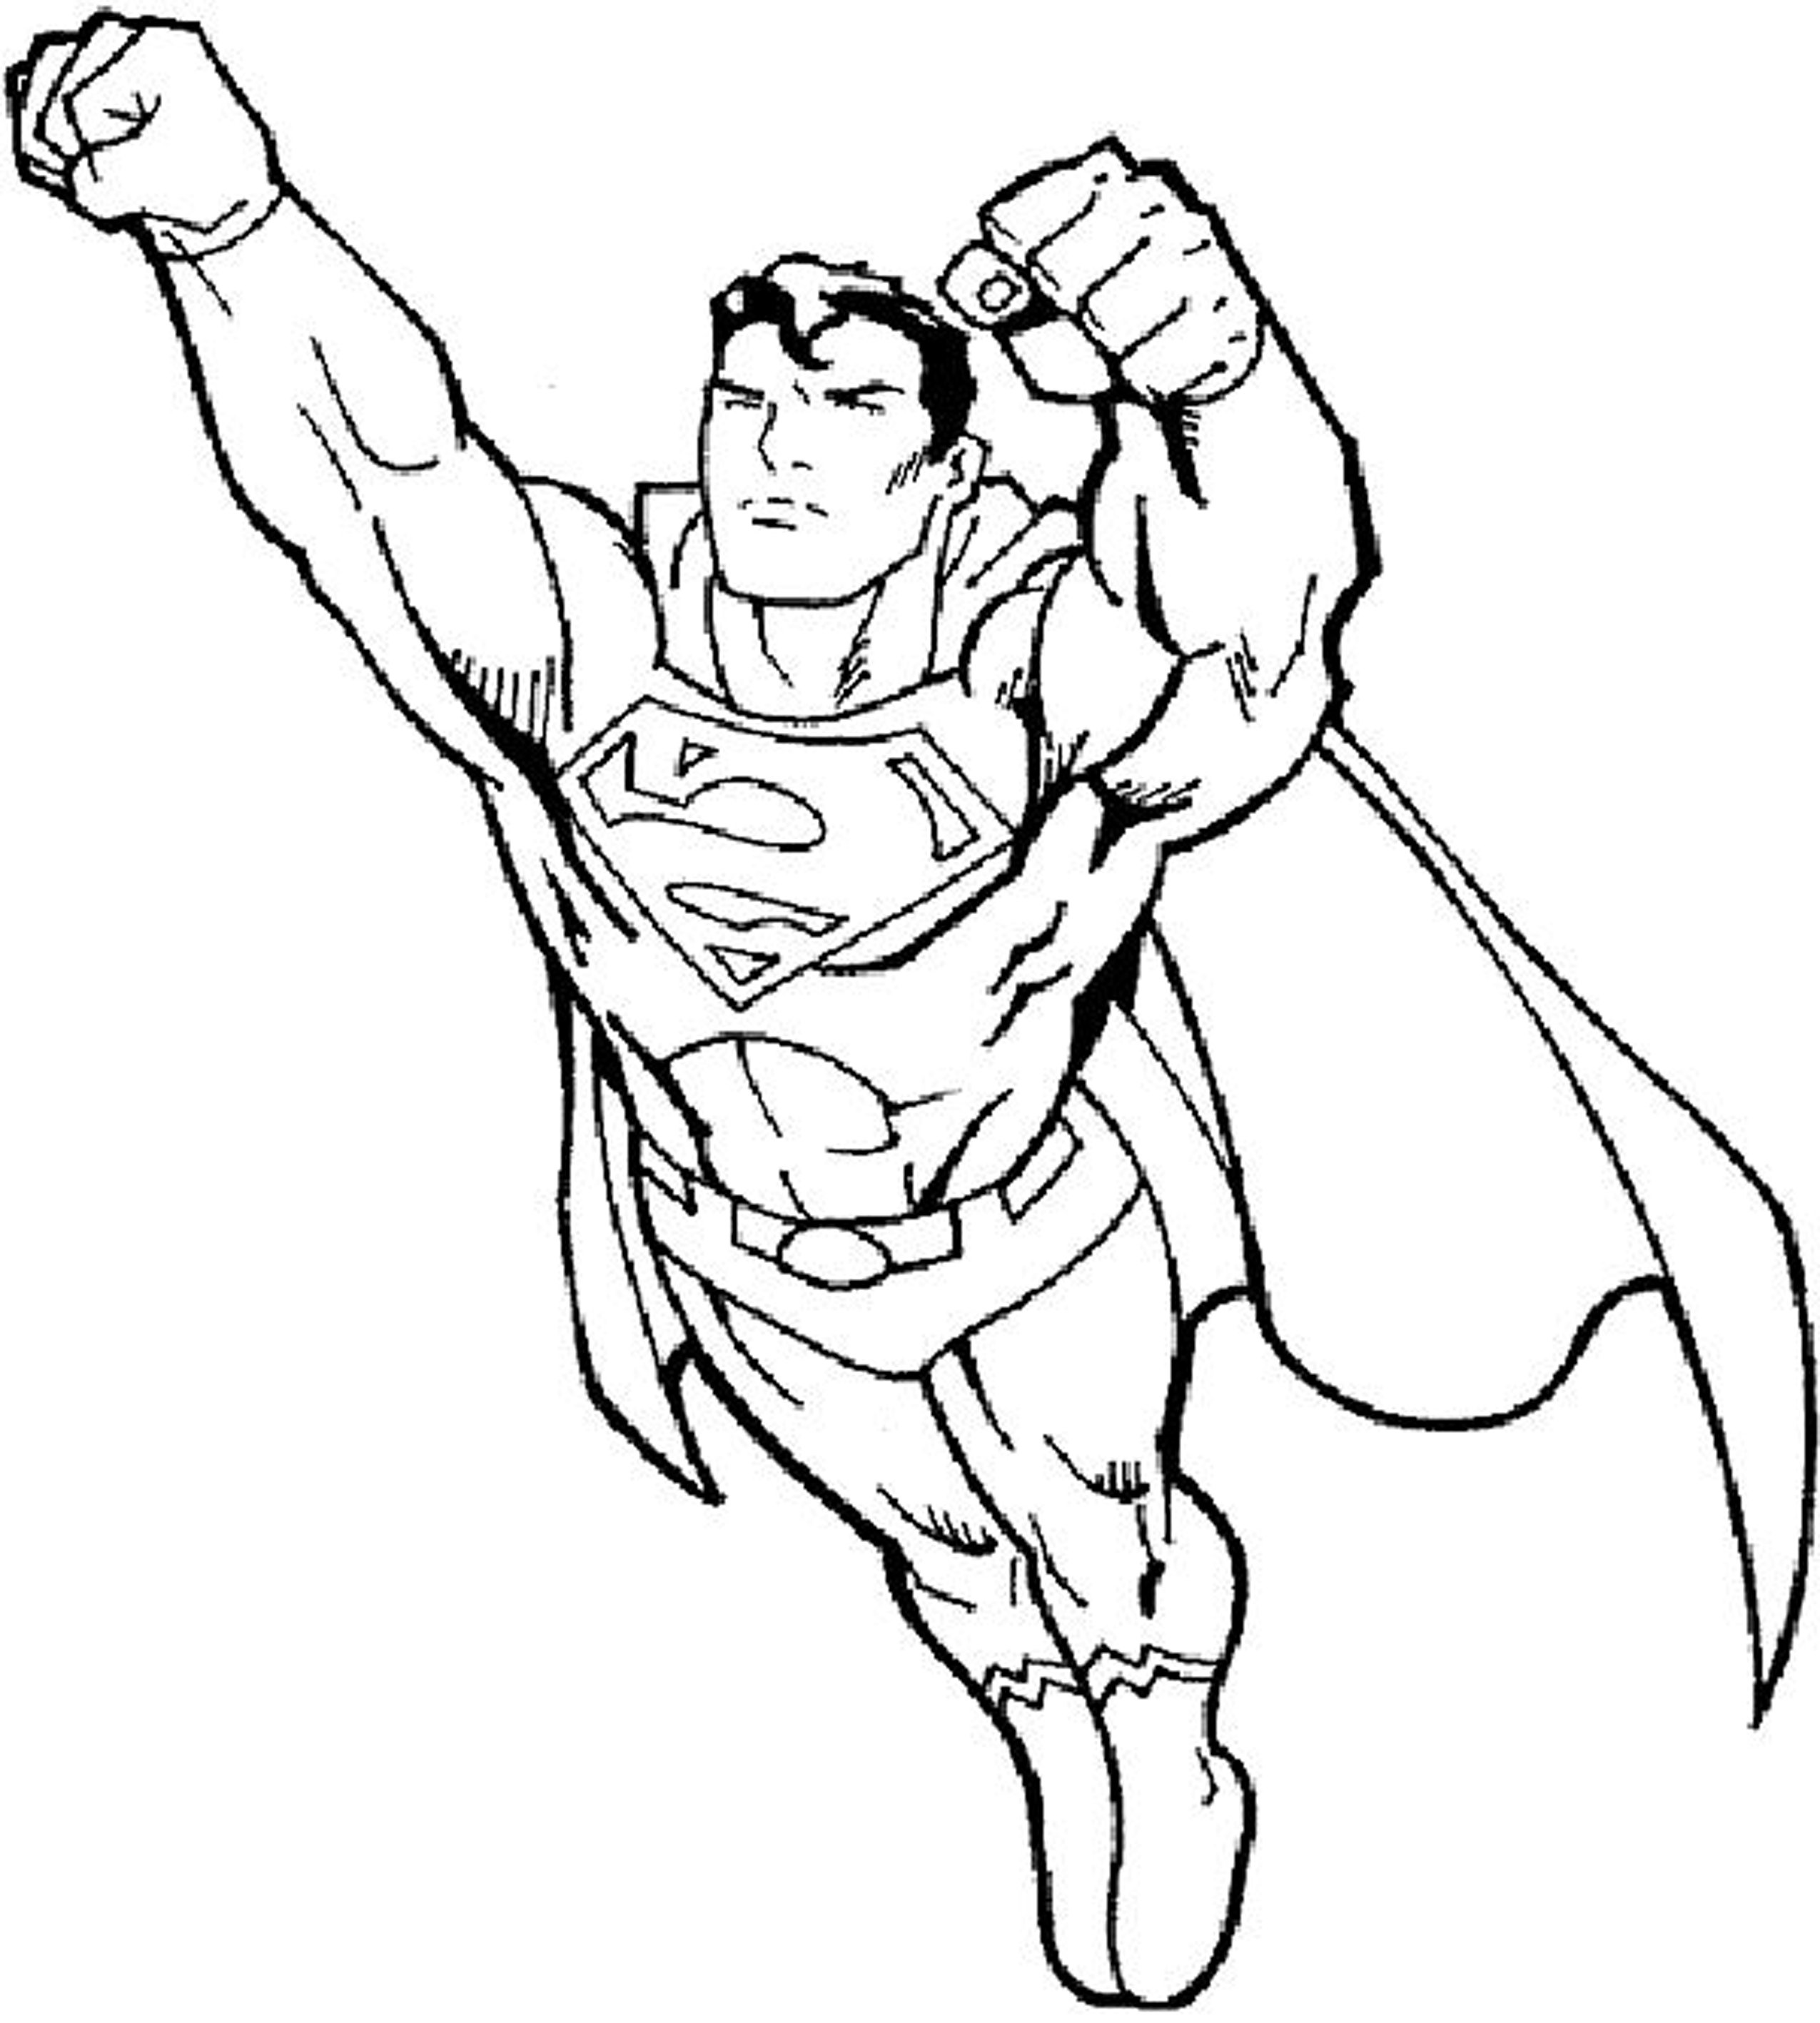 Superman coloring pages Rich image and wallpaper